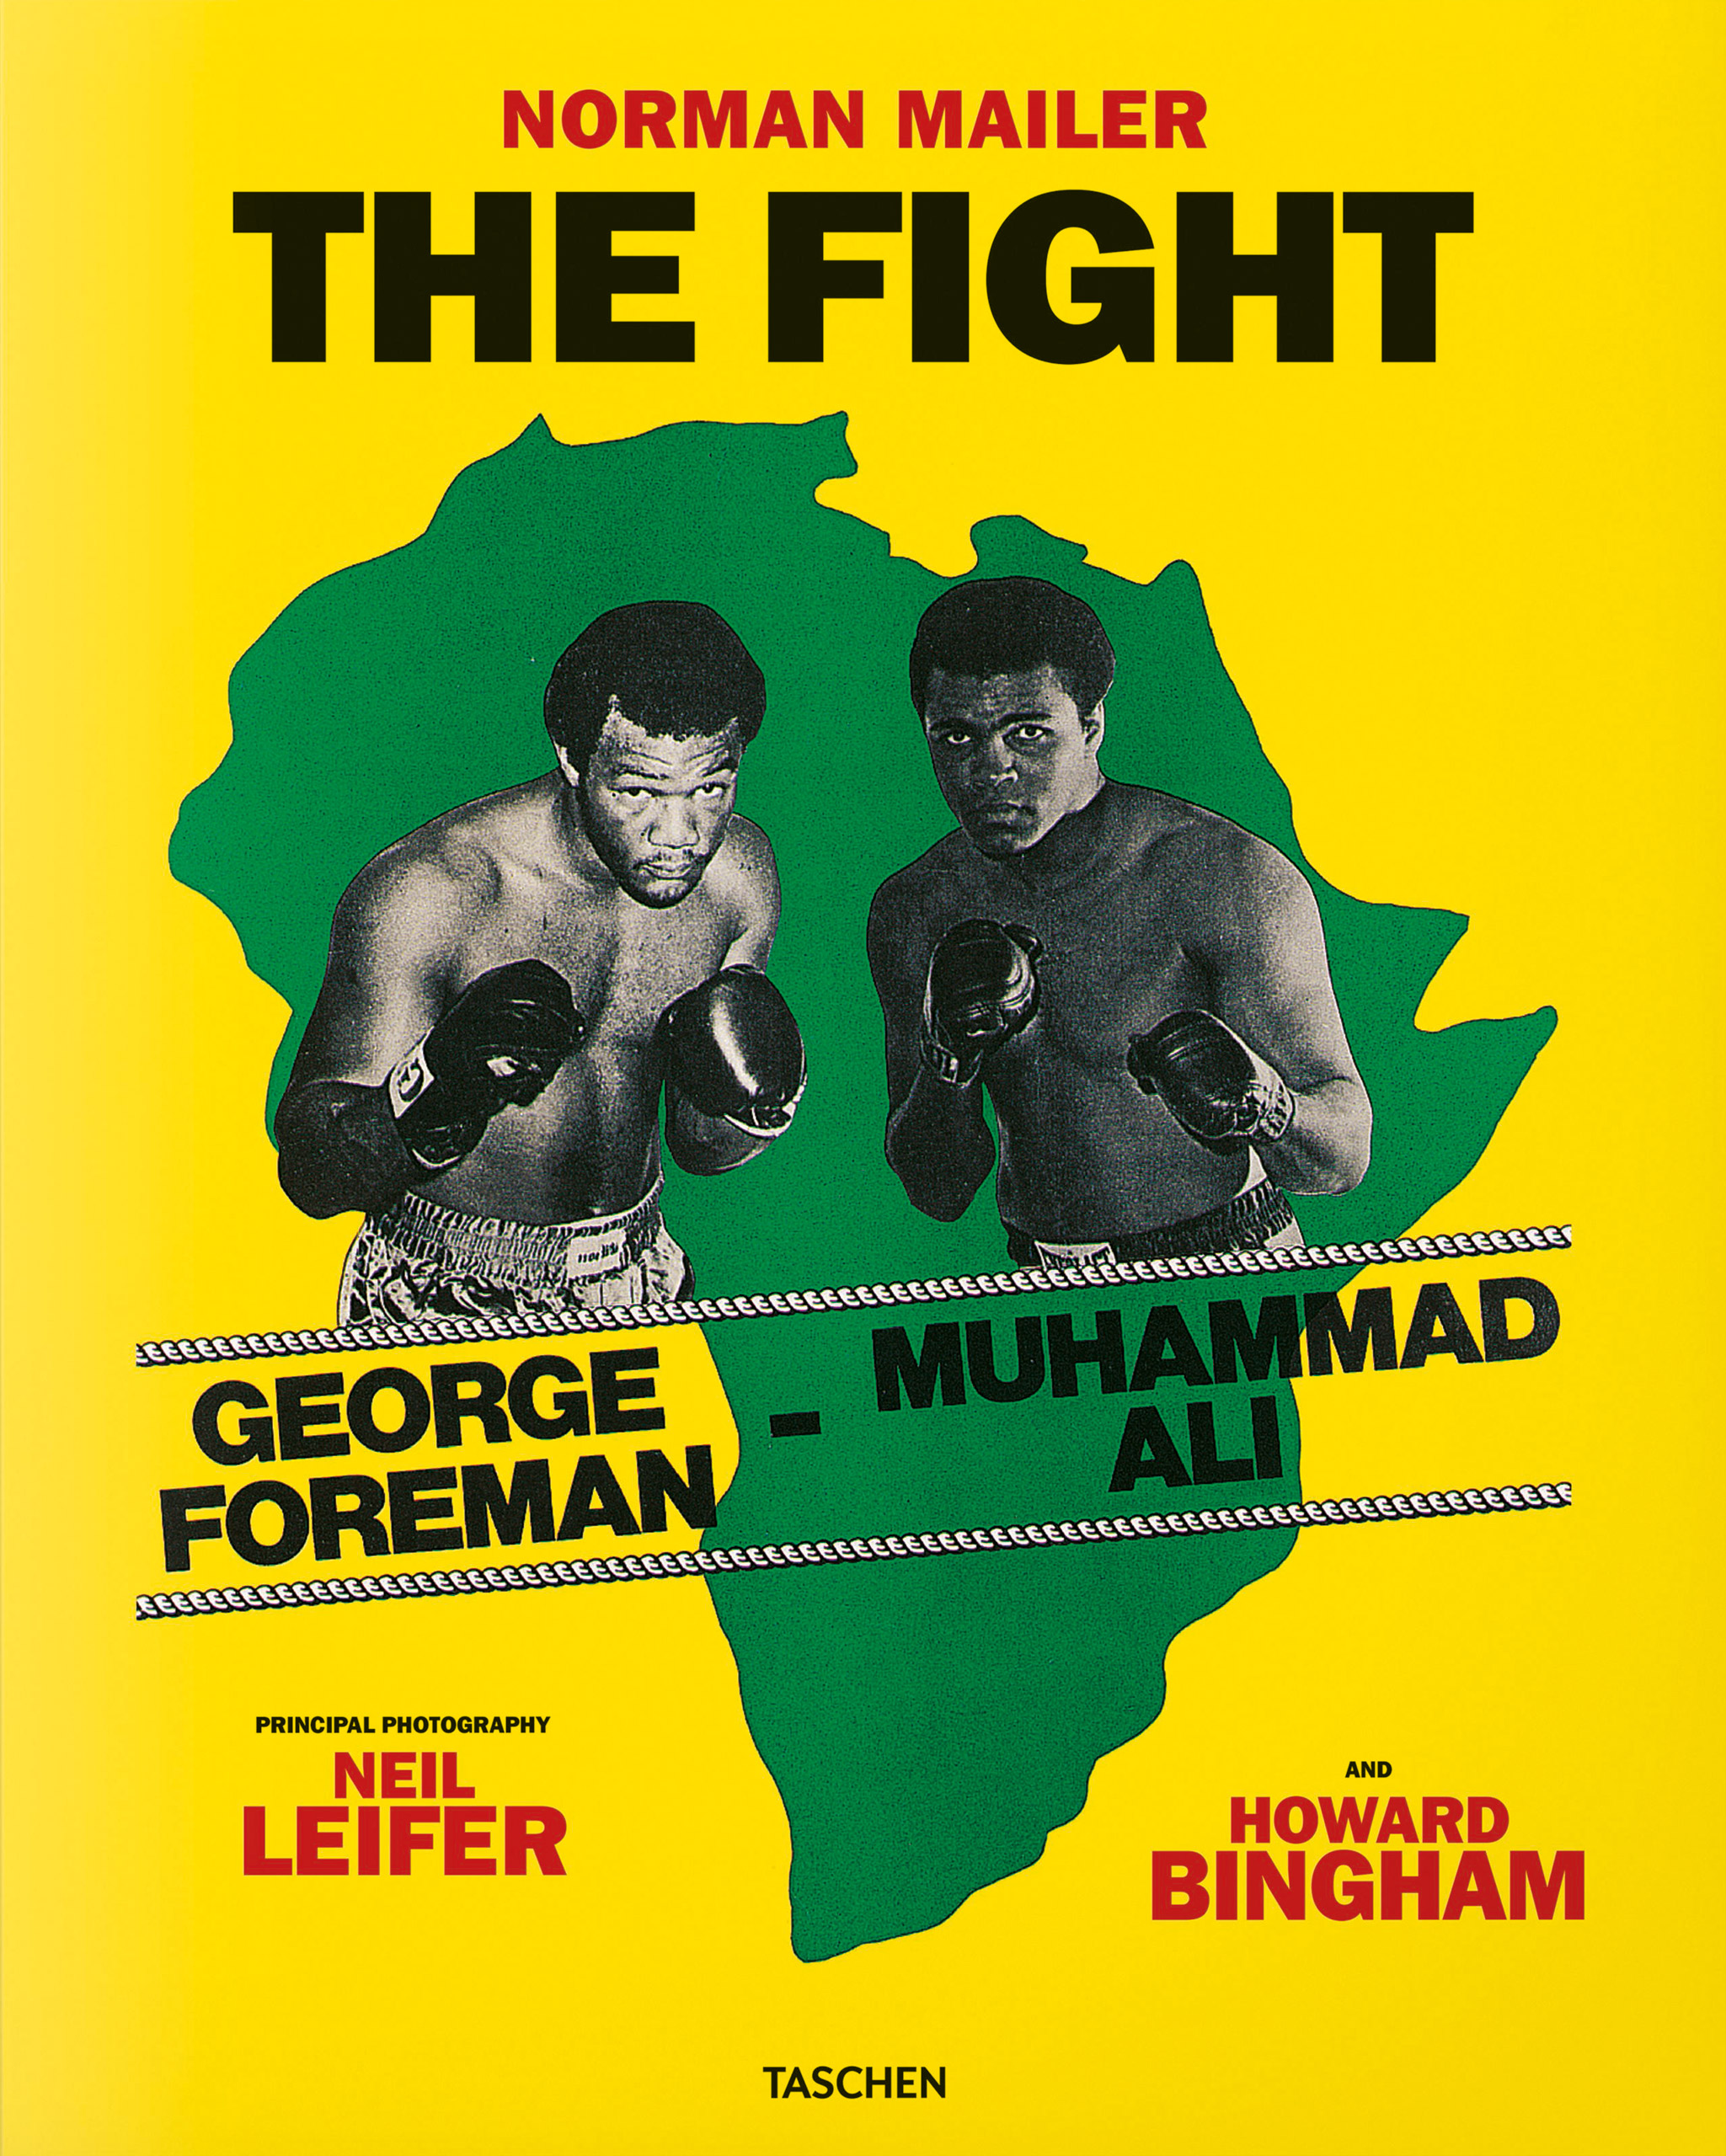 The Fight book cover, George-Foreman-Muhammad Ali